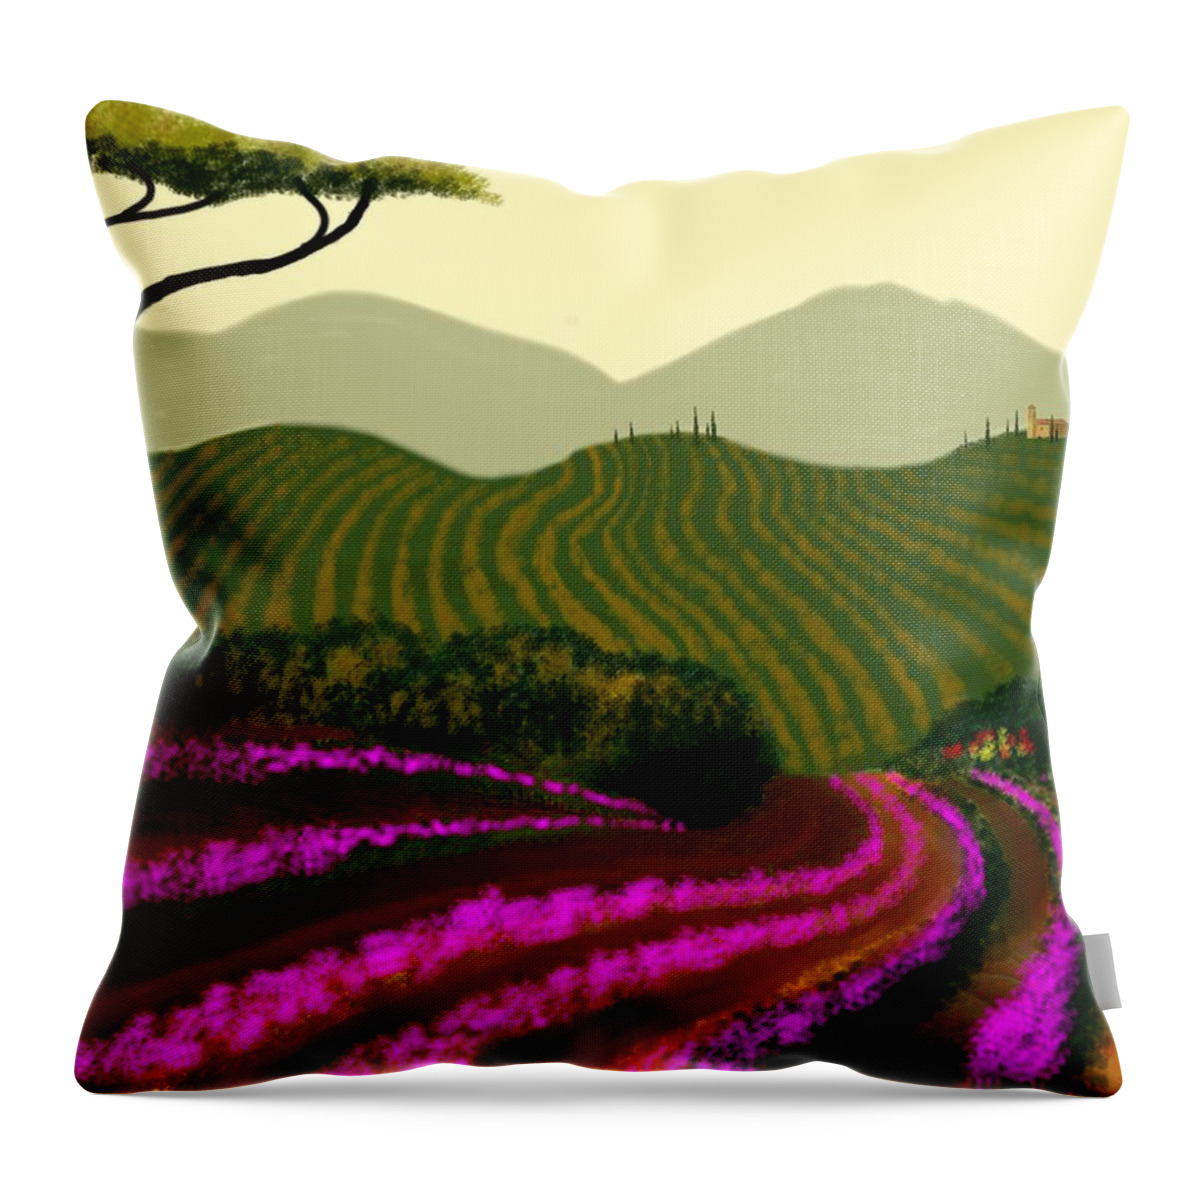 Tuscany Fields Throw Pillow featuring the painting Tuscan Fields Of Color by Larry Cirigliano